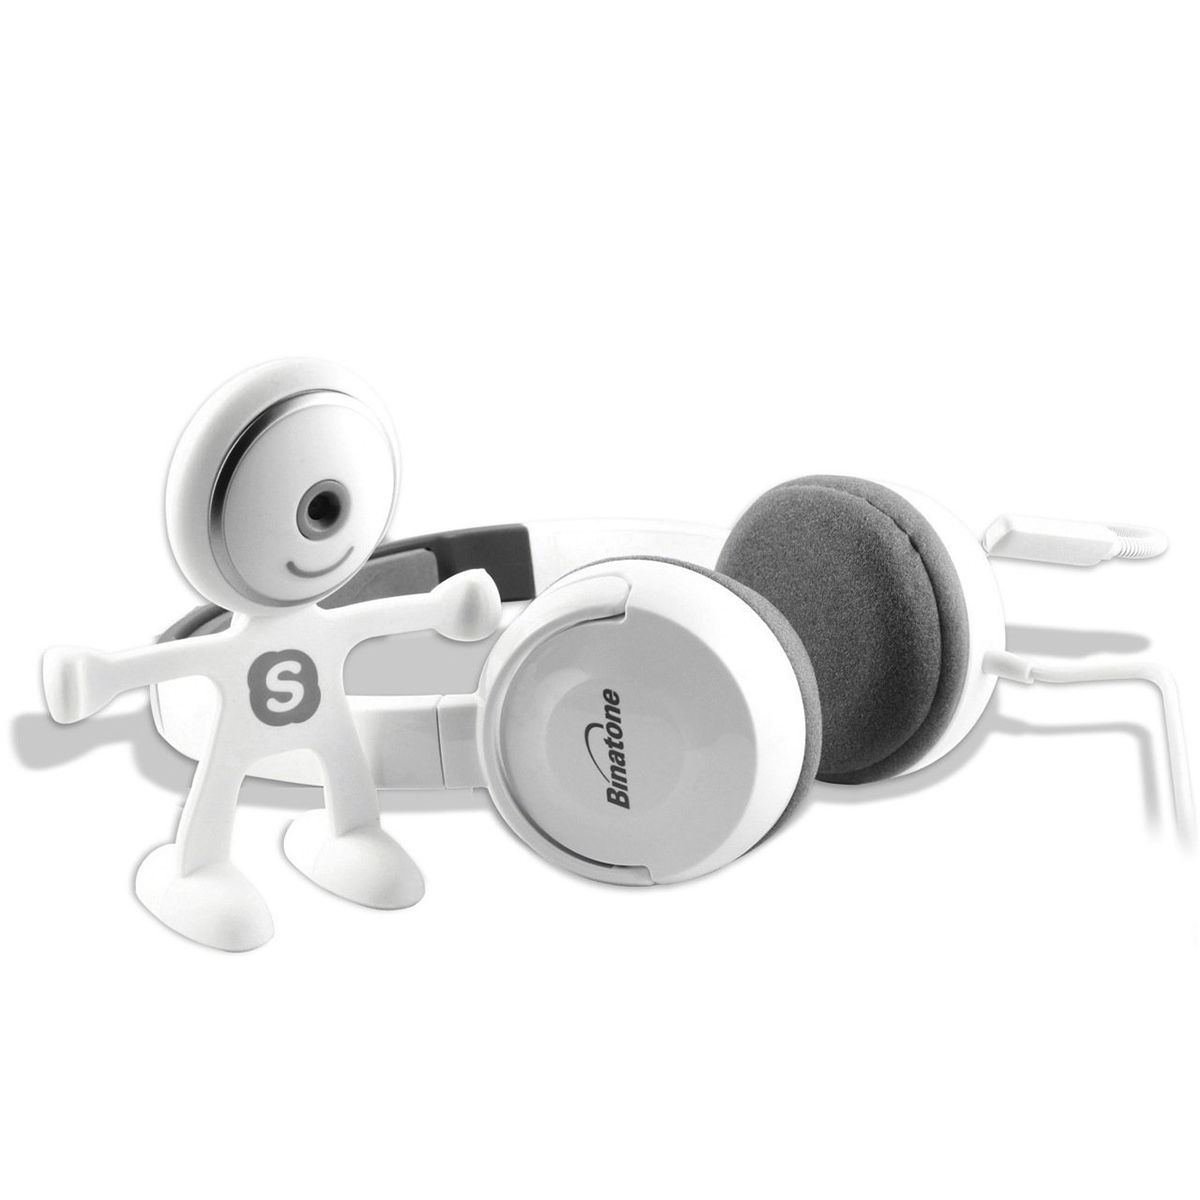 White Color Stereo Headset With Webcam